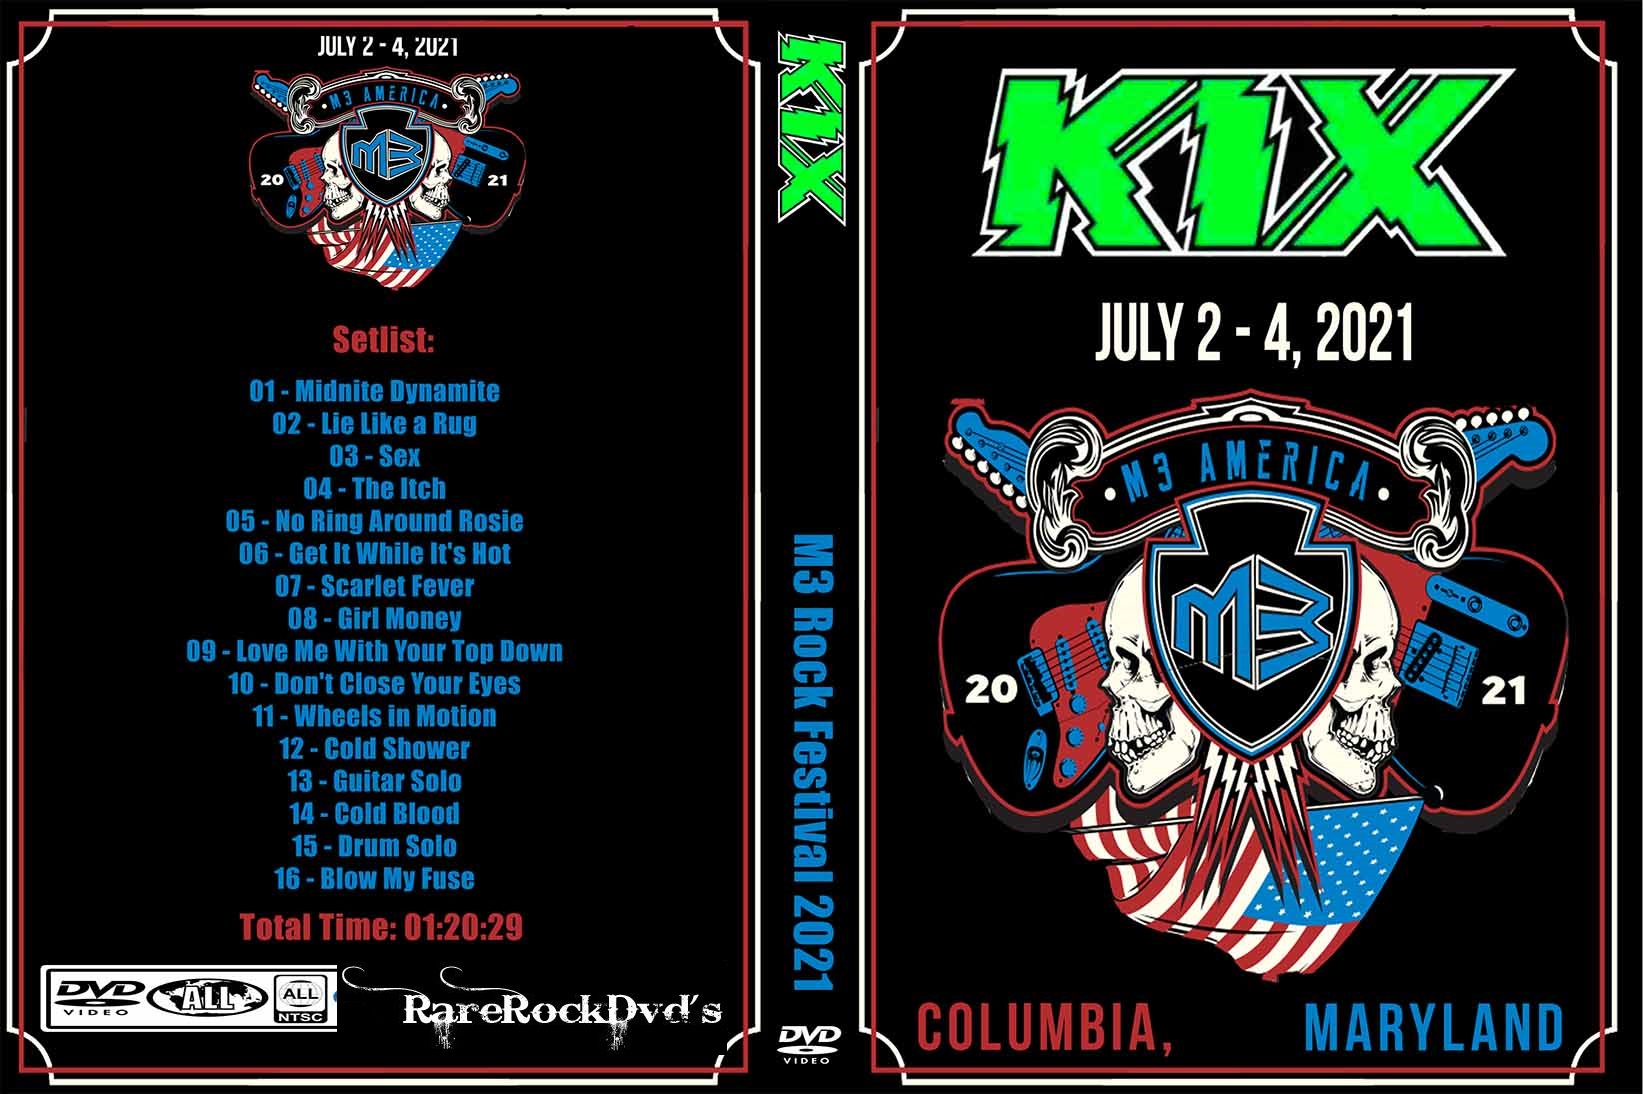 KIX Live at M3 Rock Festival 2021 DVD The World's Largest Site for